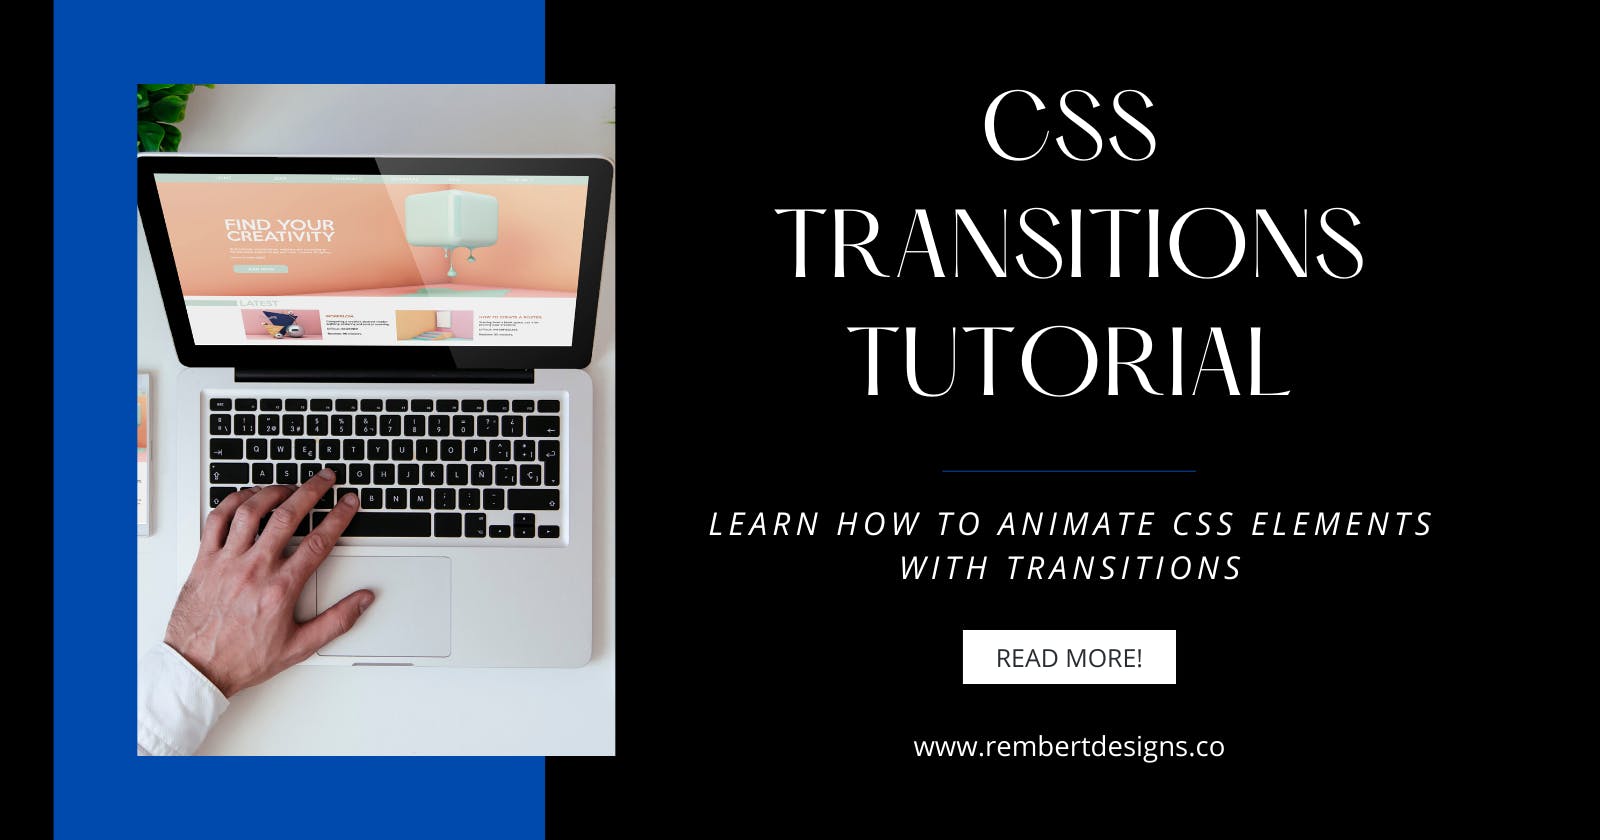 CSS Transitions Tutorial